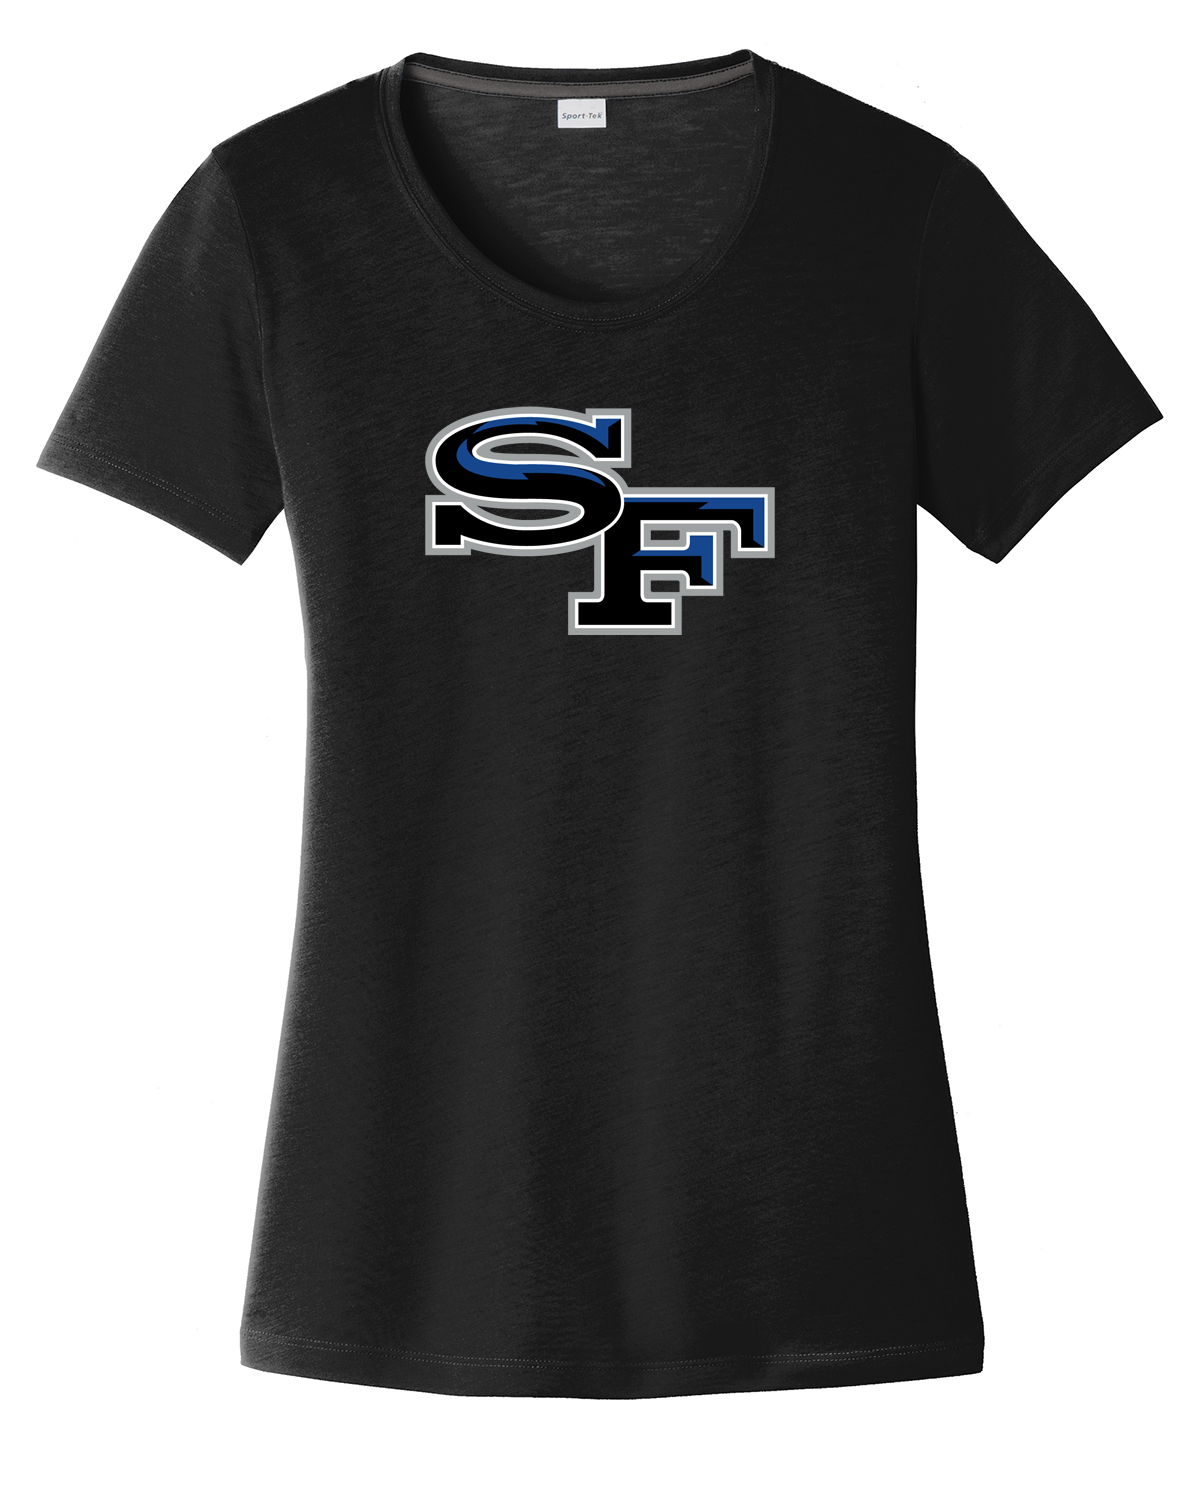 South Forsyth Girls Lacrosse Women's CottonTouch Performance T-Shirt